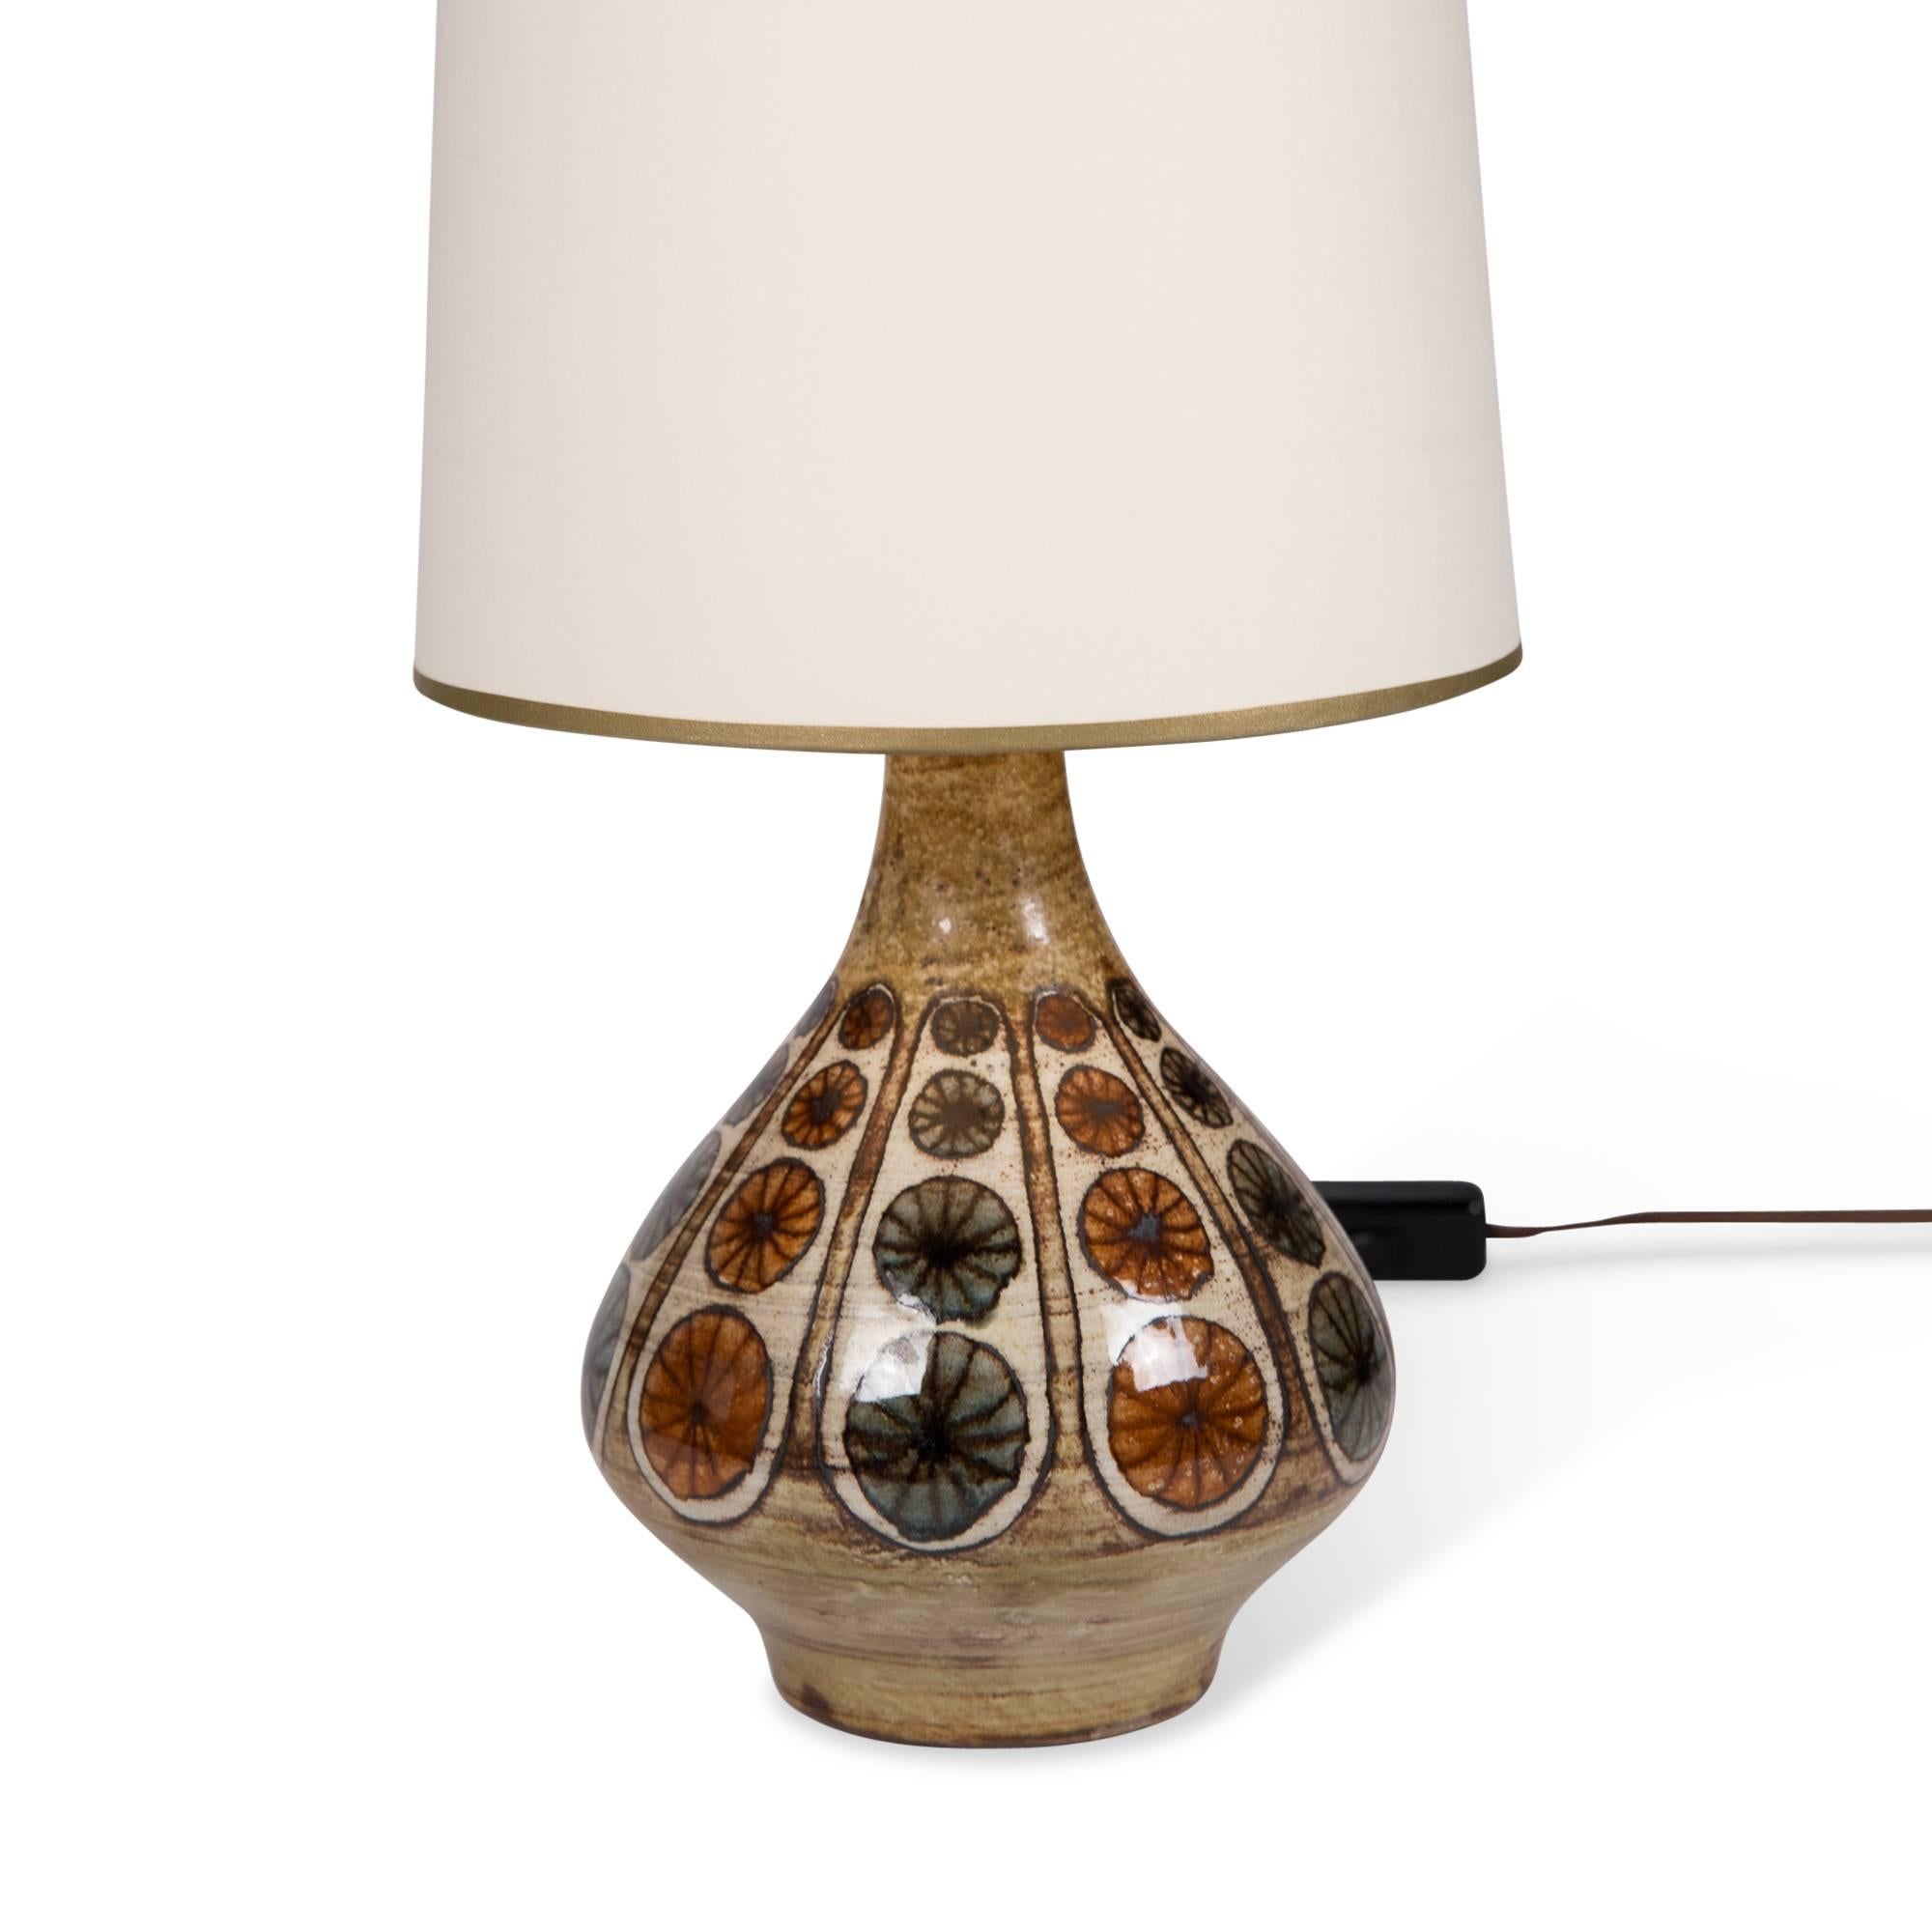 Ceramic table lamp, pale glazed ceramic with colored geometric decoration, by Jean Malarmey, France, 1960s. Measures: Overall height 16 1/2 in, diameter of base 5 1/2 in. Shade measures top dia 6 1/2 in, bottom dia 8 in, height 9 in.